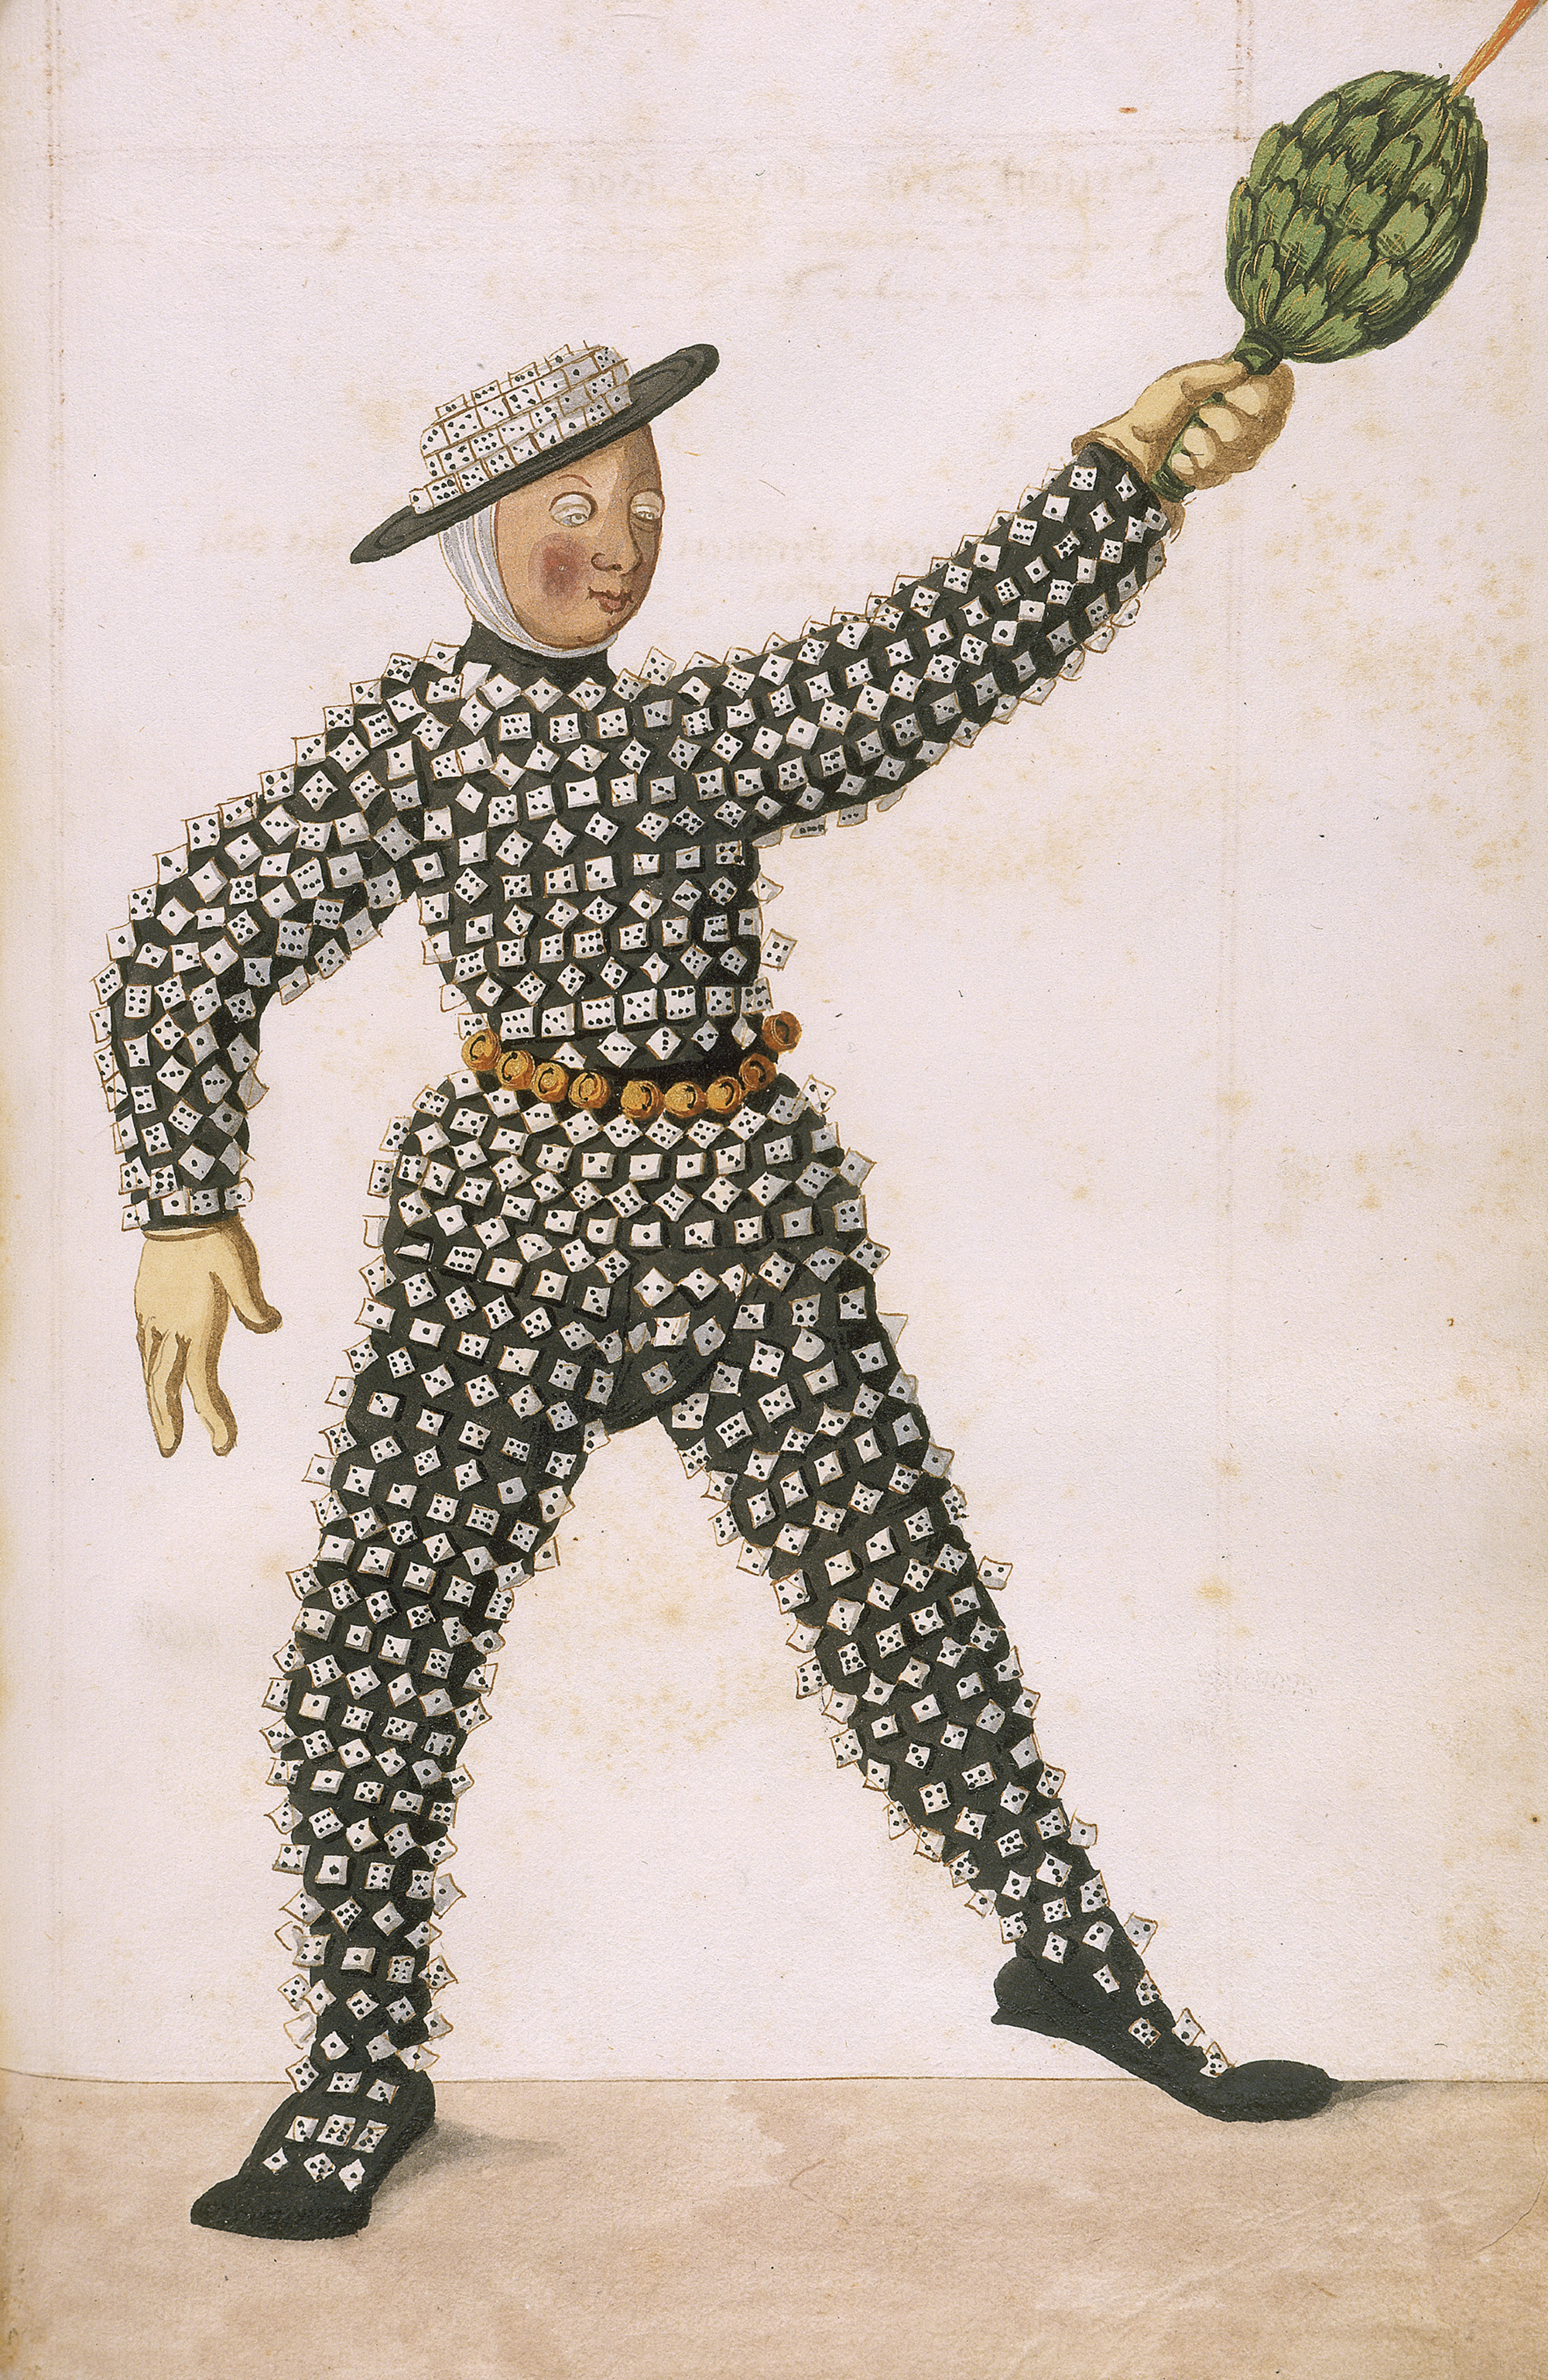 A circa 1600 illustration titled “Dice Man” depicting a man wearing clothing and a hat entirely covered with dice, from “Schoenbartbuch,” an illustrated manuscript from Nuremberg.